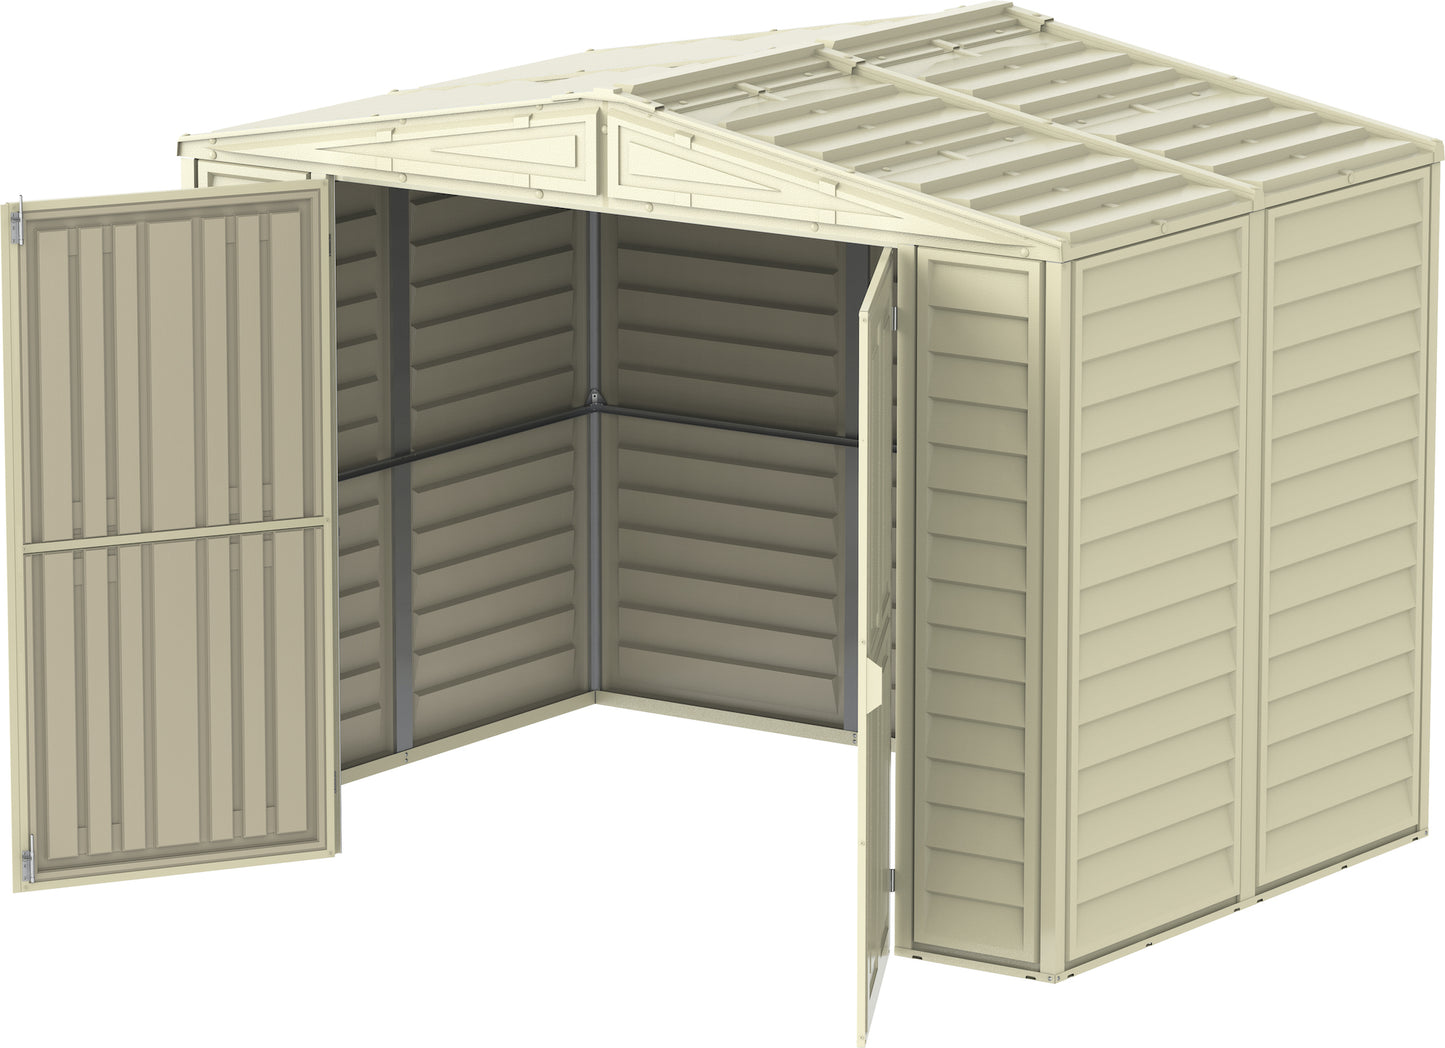 Duramax 8ft x 5.5ft Duramate Vinyl Storage Shed with Foundation